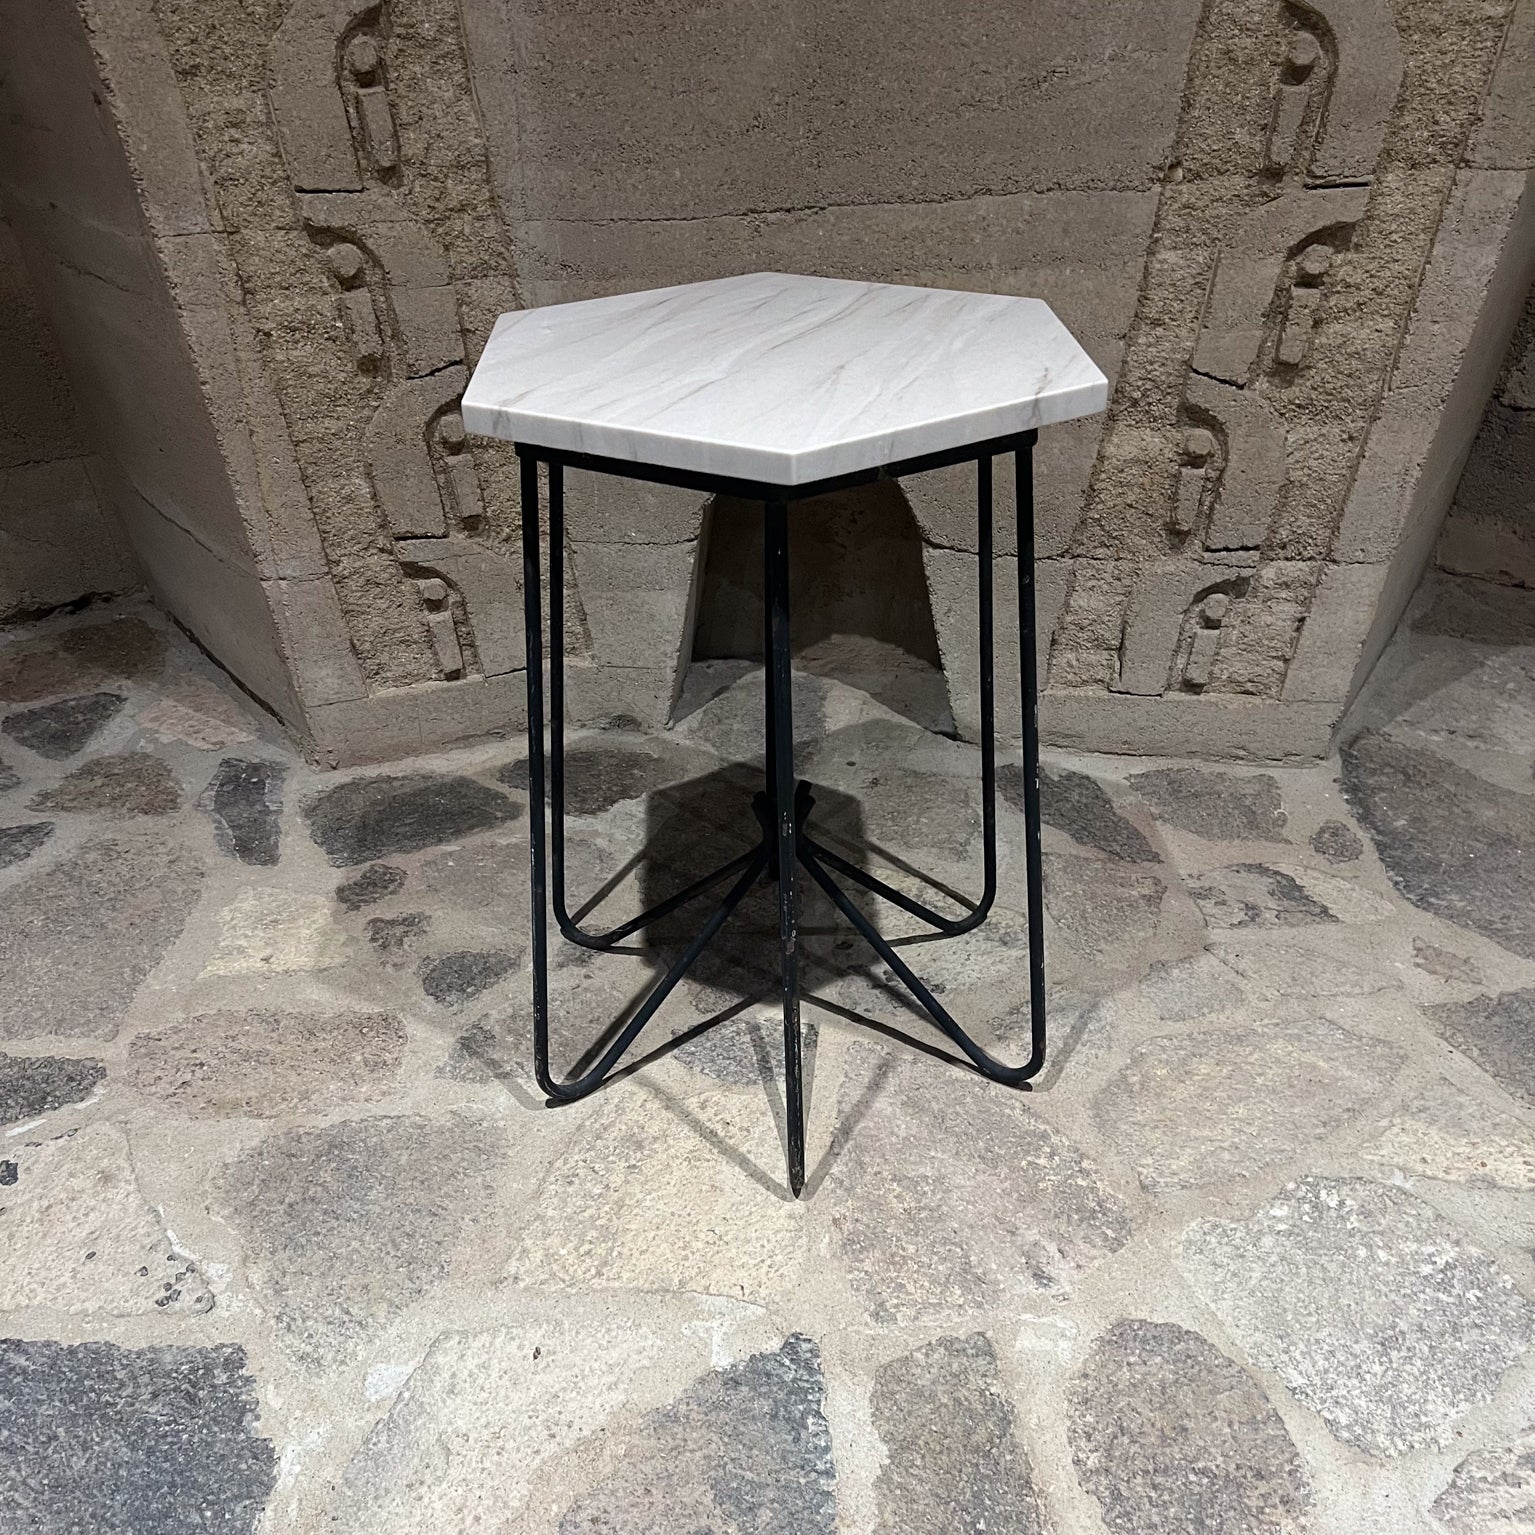 
Sculptural Hexagonal Side Accent Table French style of Jean Royere
Stone on Black Iron
24.75 h x 19.5 diameter
Refer to images provided.
Preowned original unrestored vintage. Wear consistent with age and use.
LA OC Palm Springs delivery